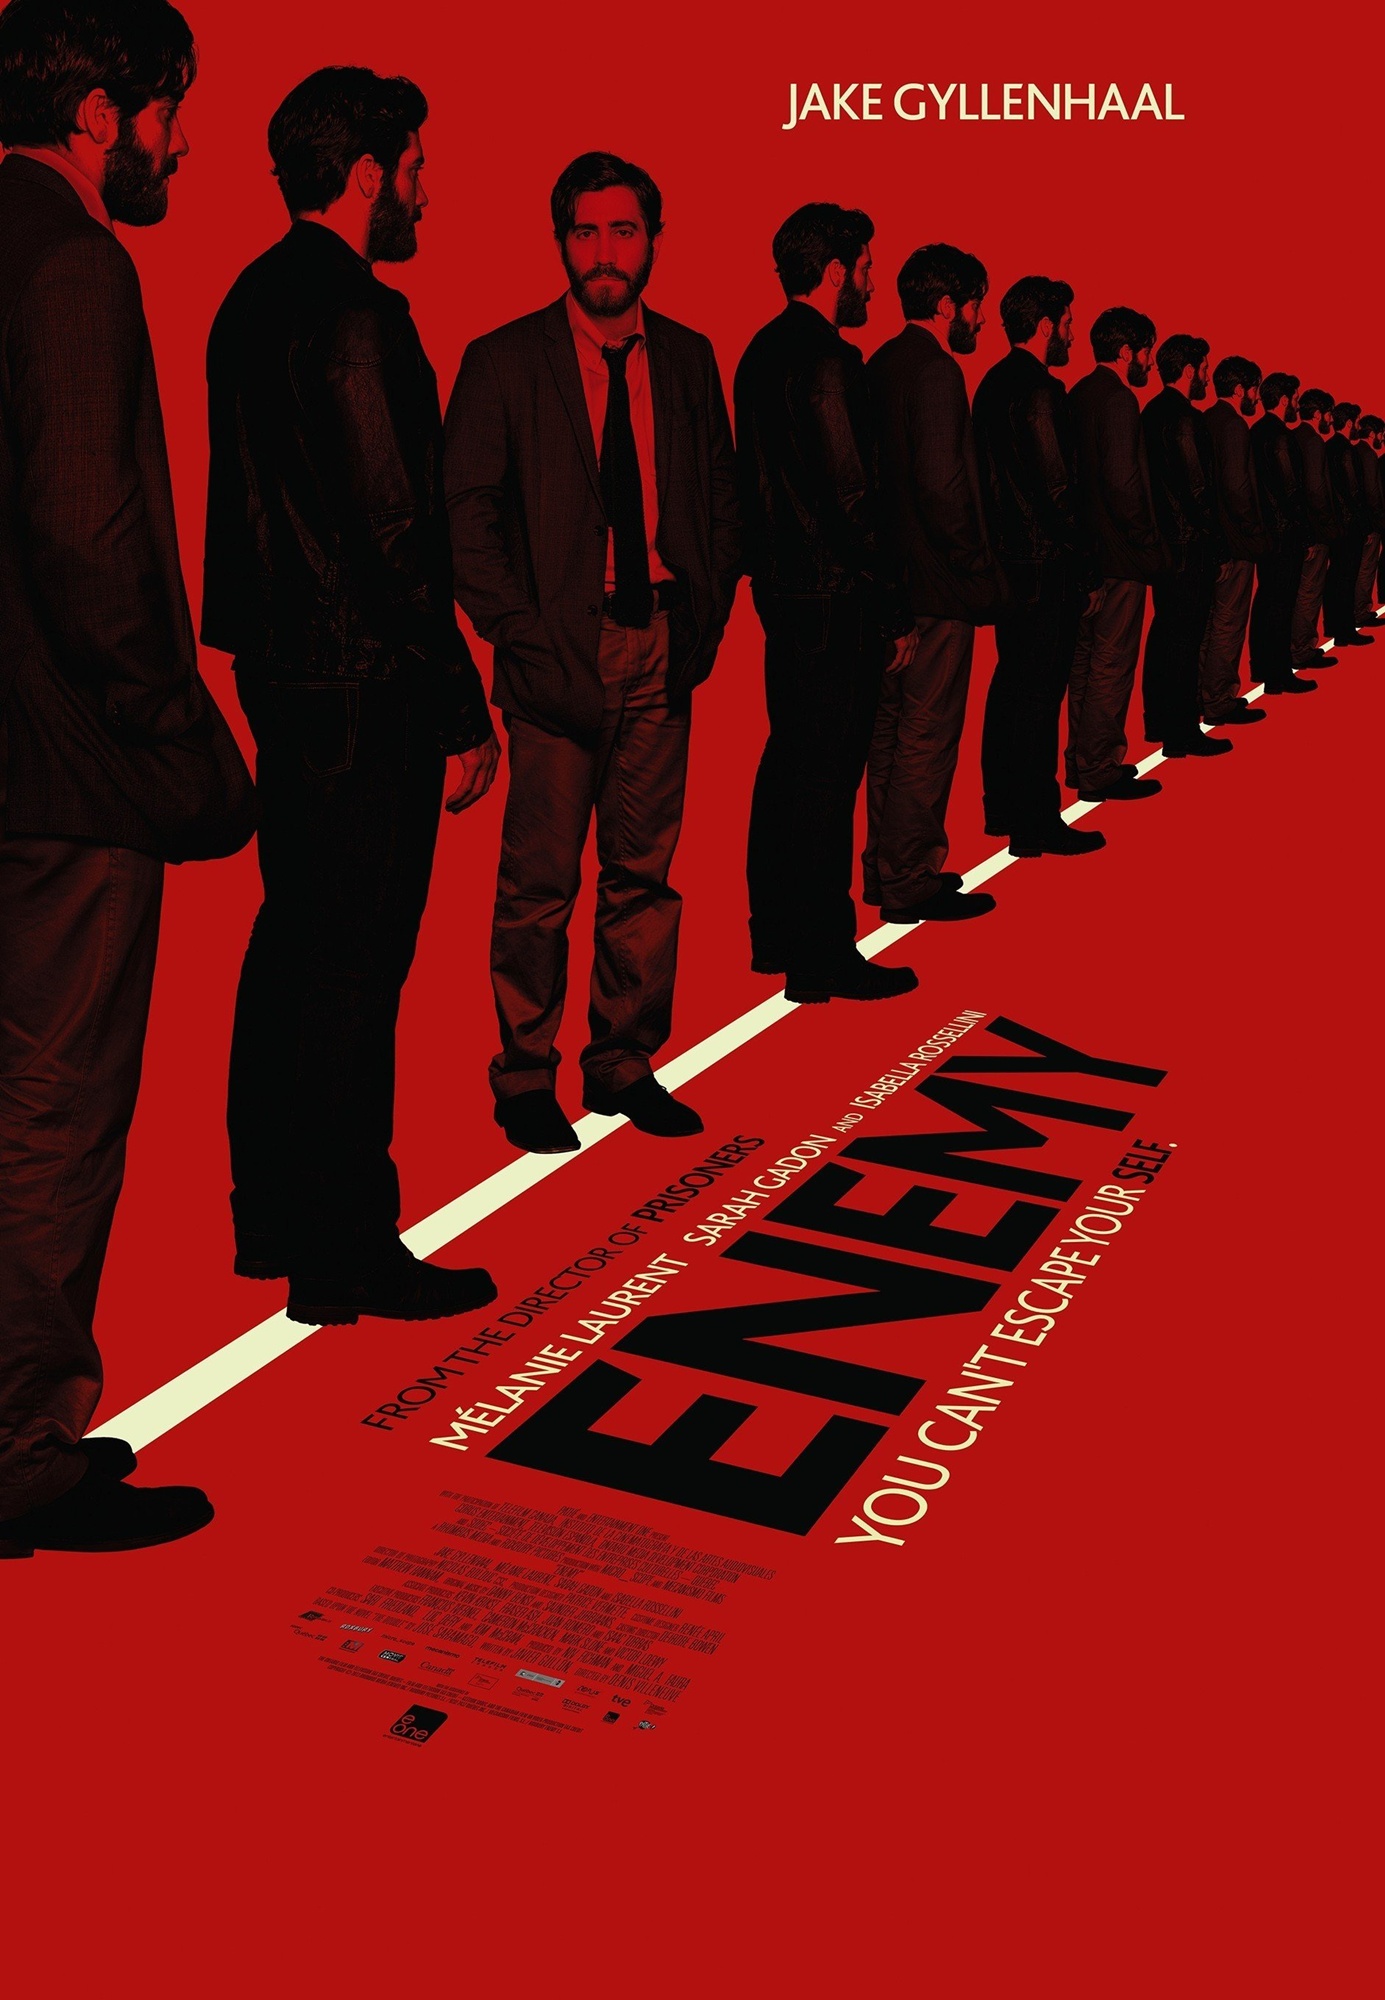 Poster of A24's Enemy (2014)